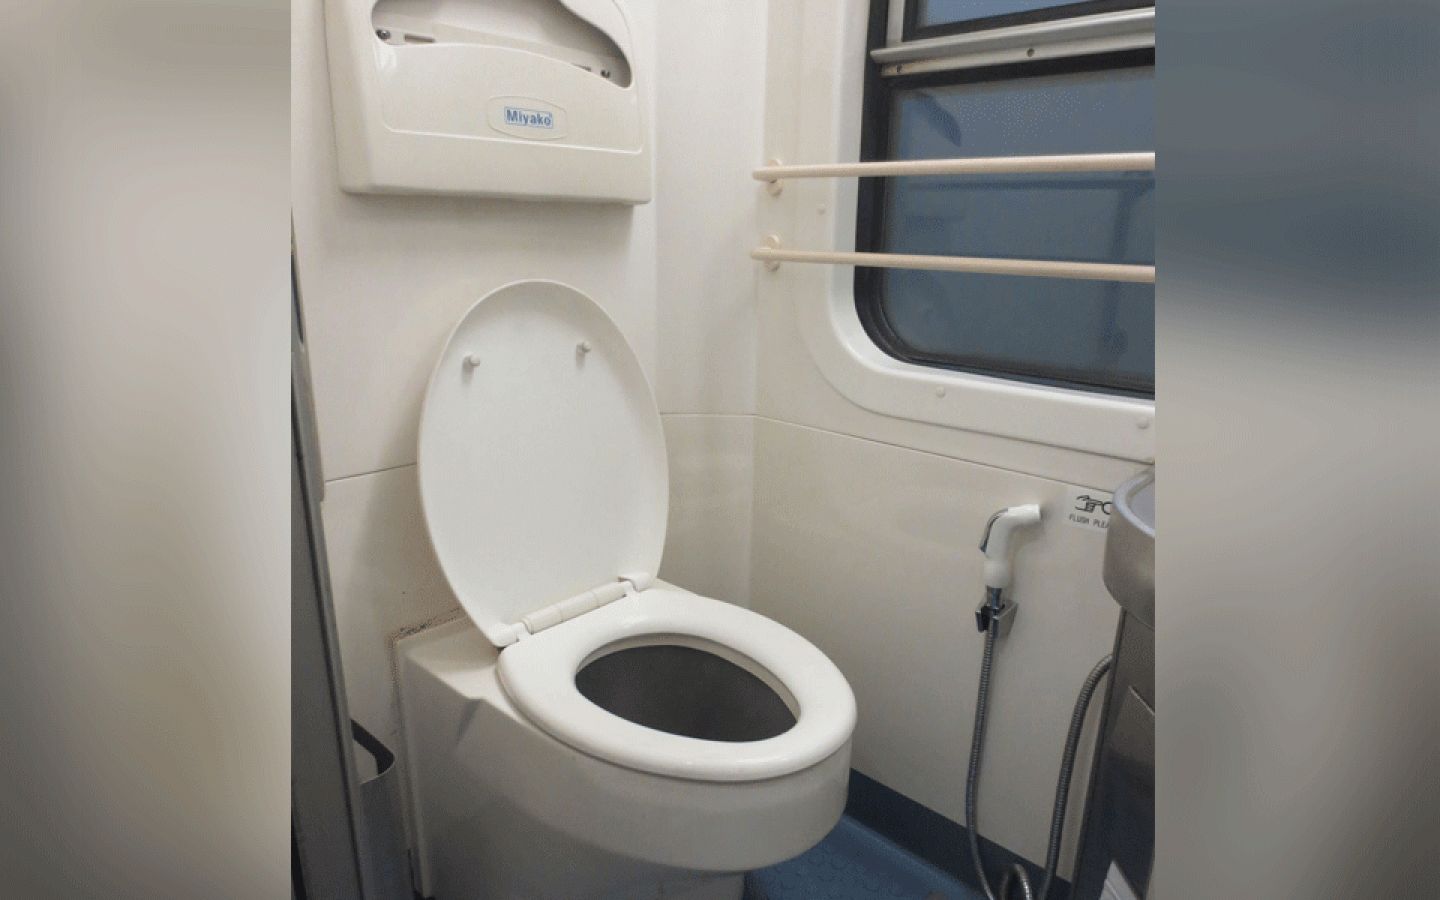 History Of Toilet in Trains 